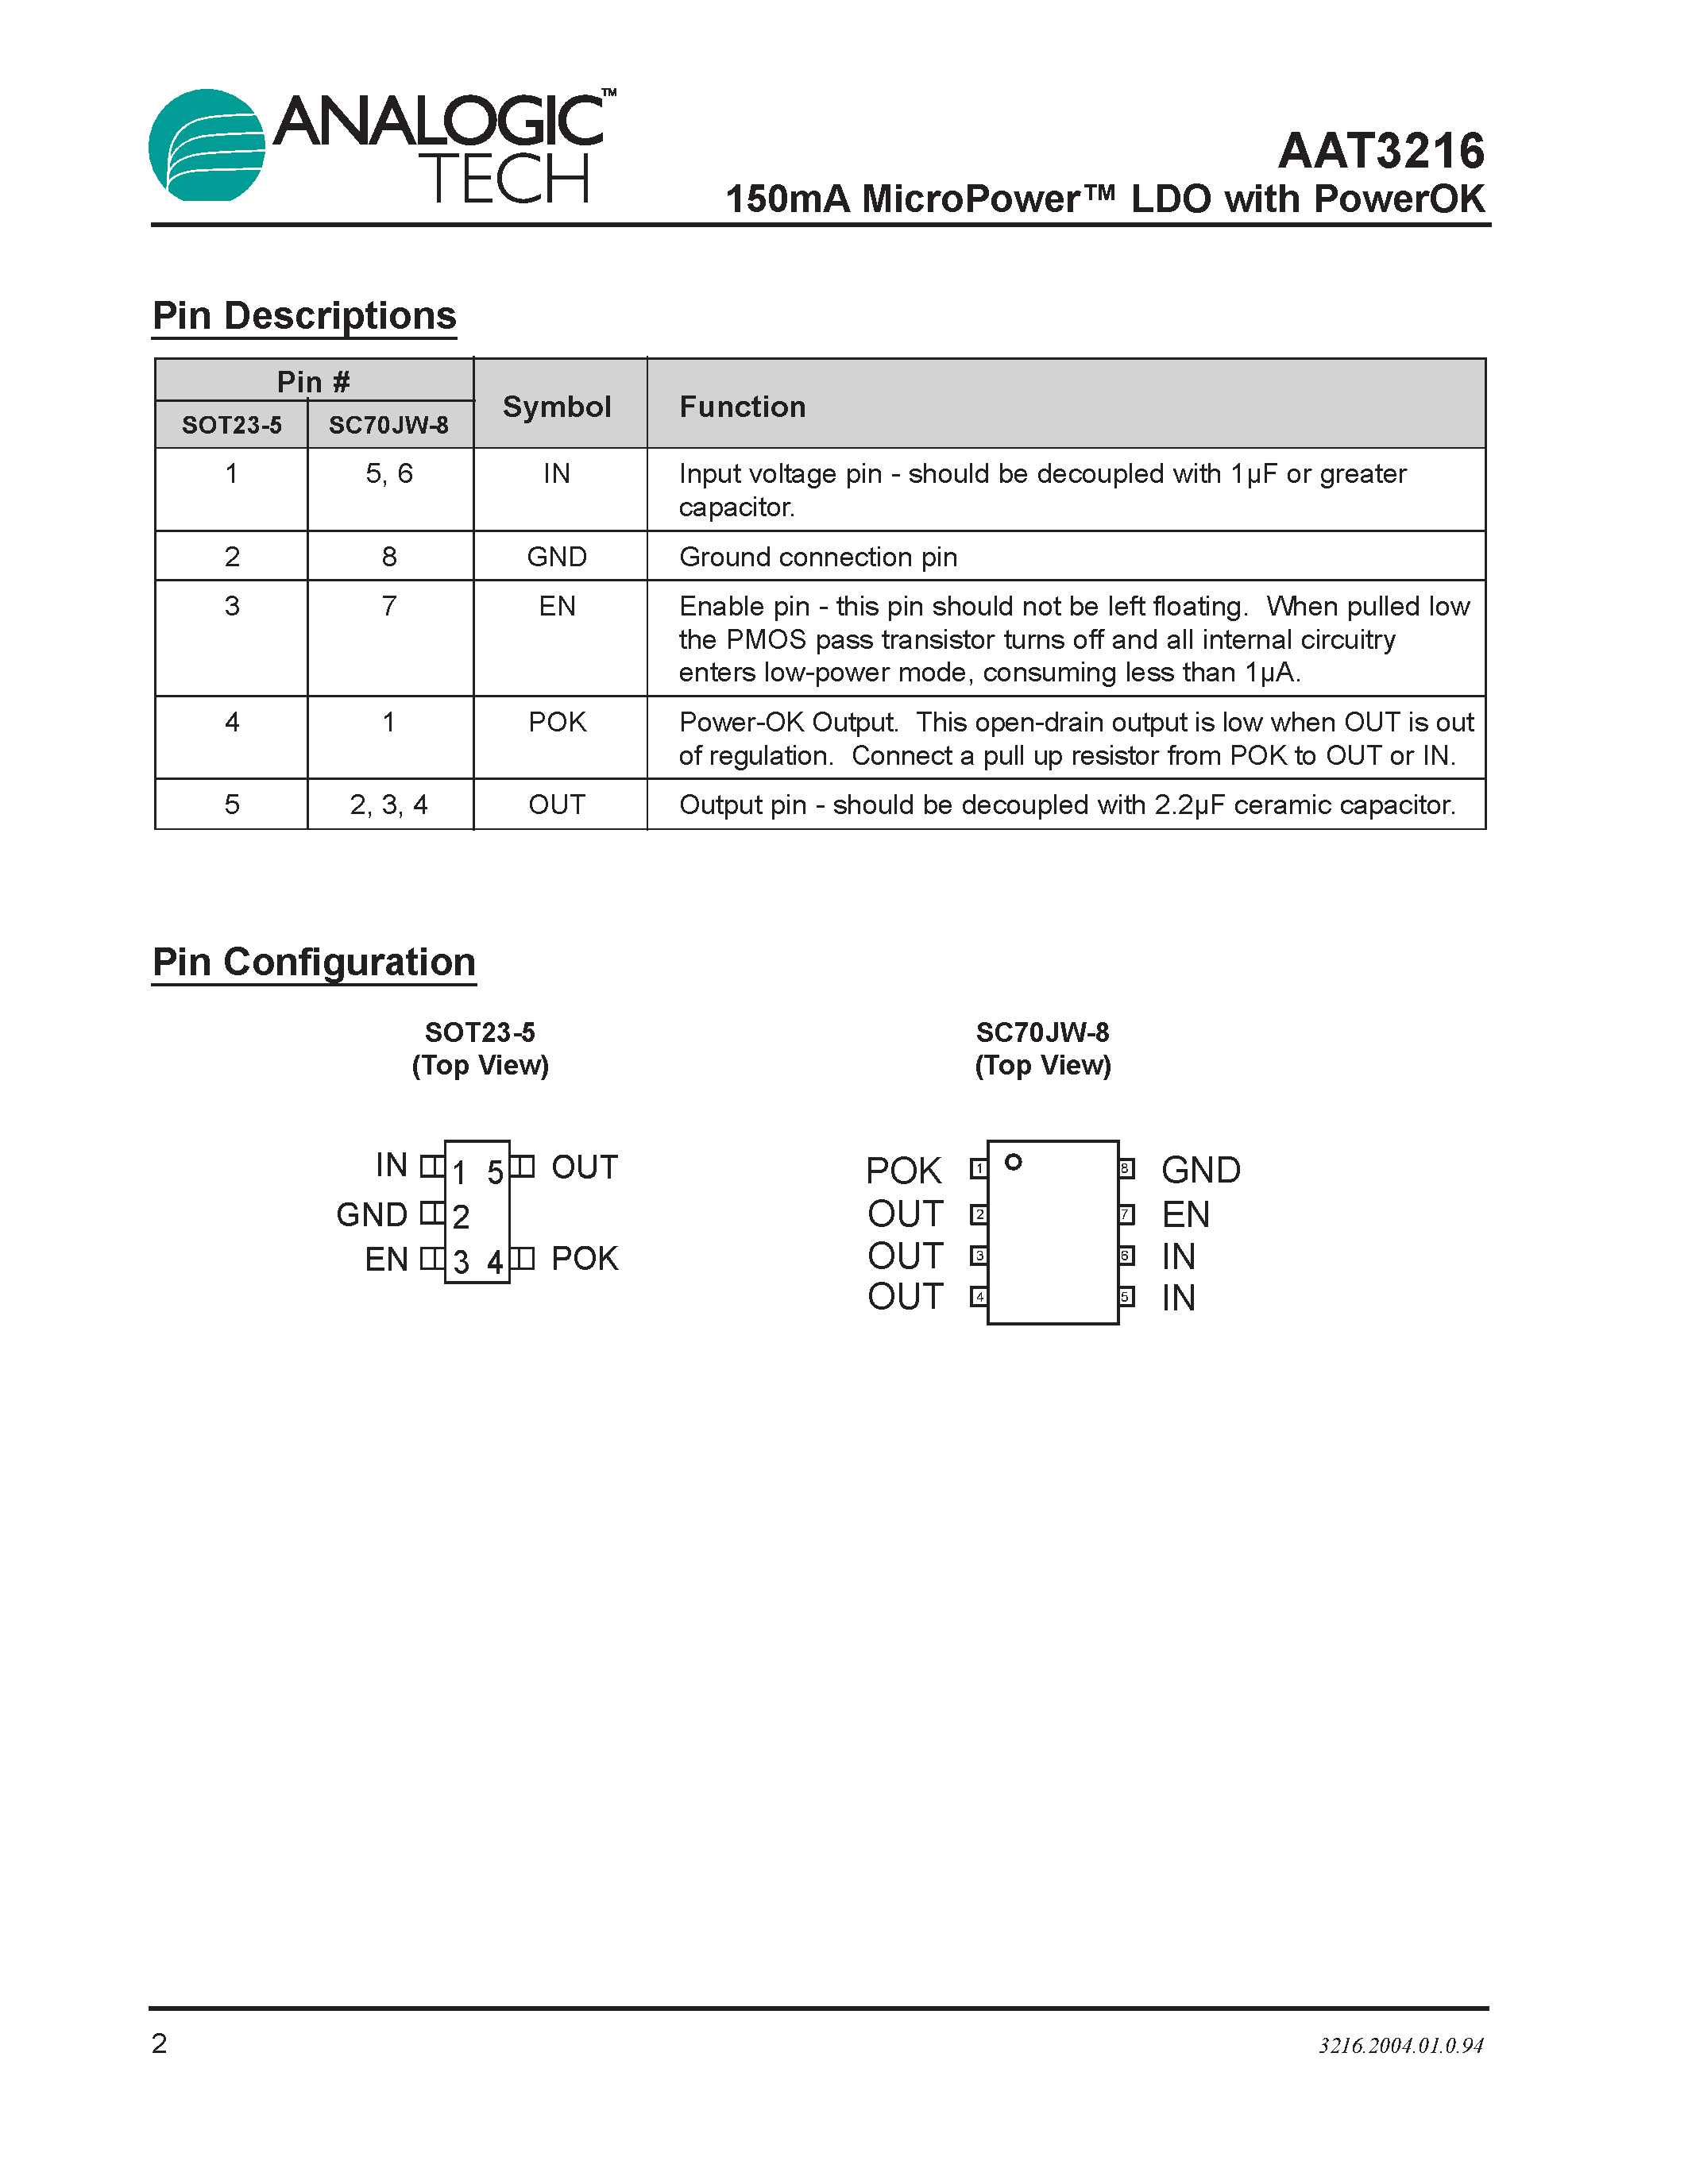 Datasheet AAT3216IGV-2.8-T1 - 150mA MicroPower LDO with PowerOK page 2